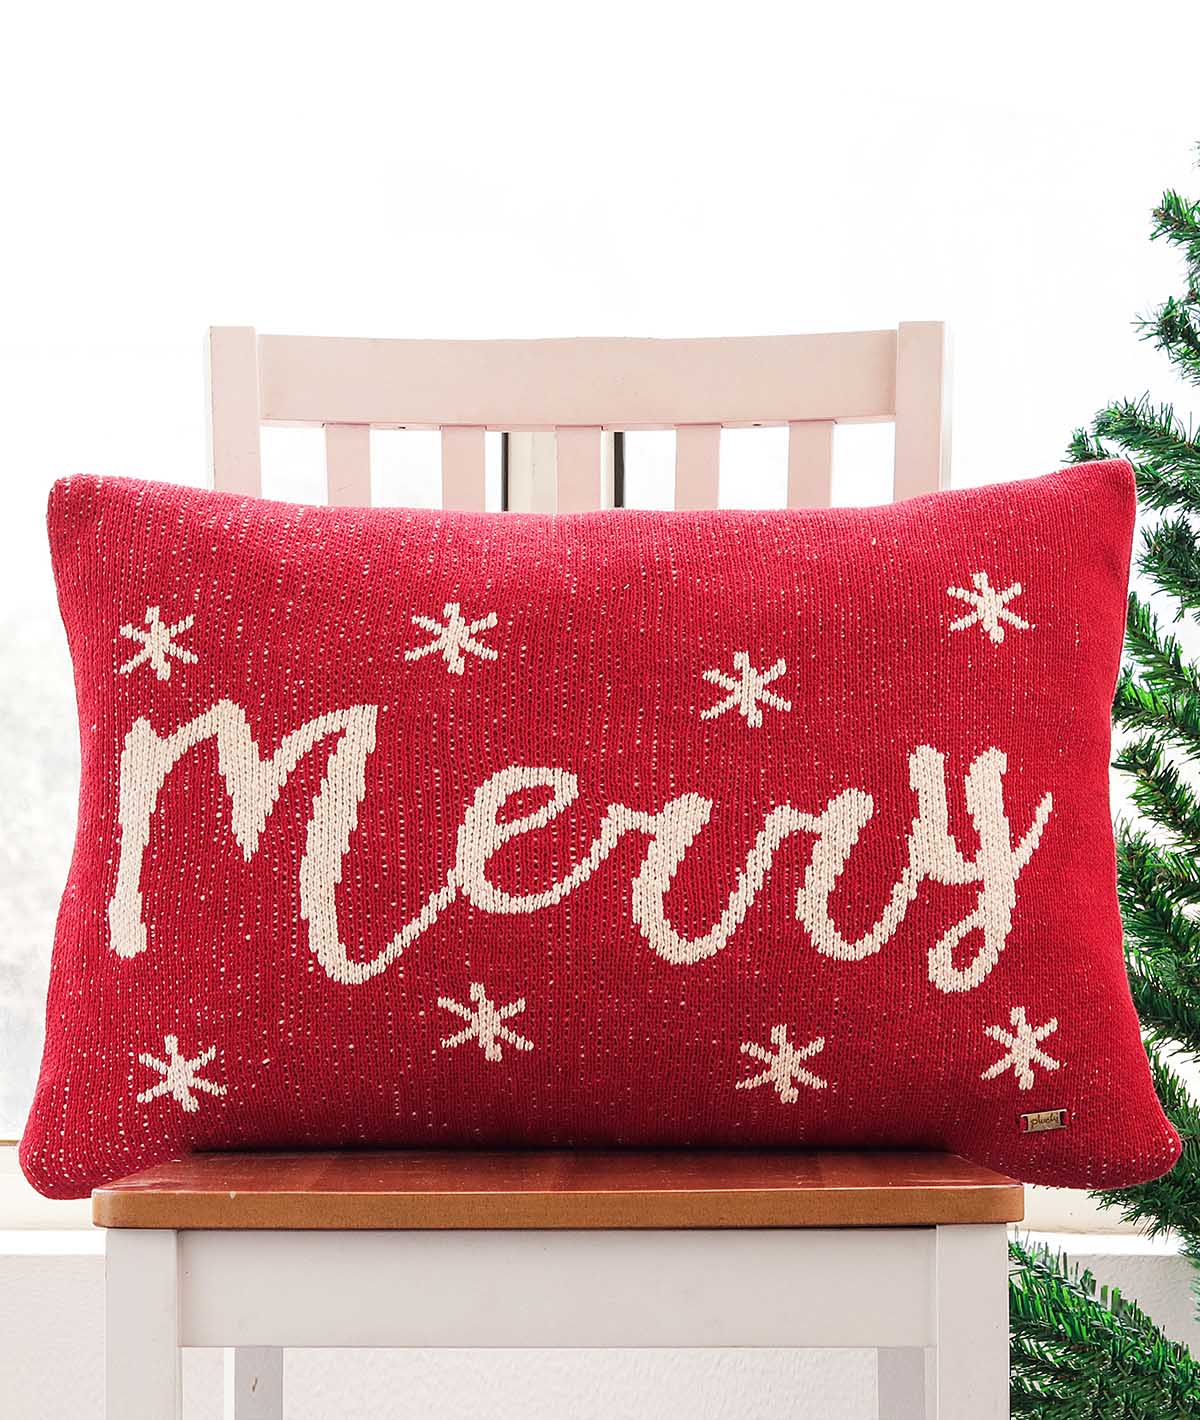 Merry Cotton Knitted Decorative Red Color 16 x 24 Inches Pillow Covers